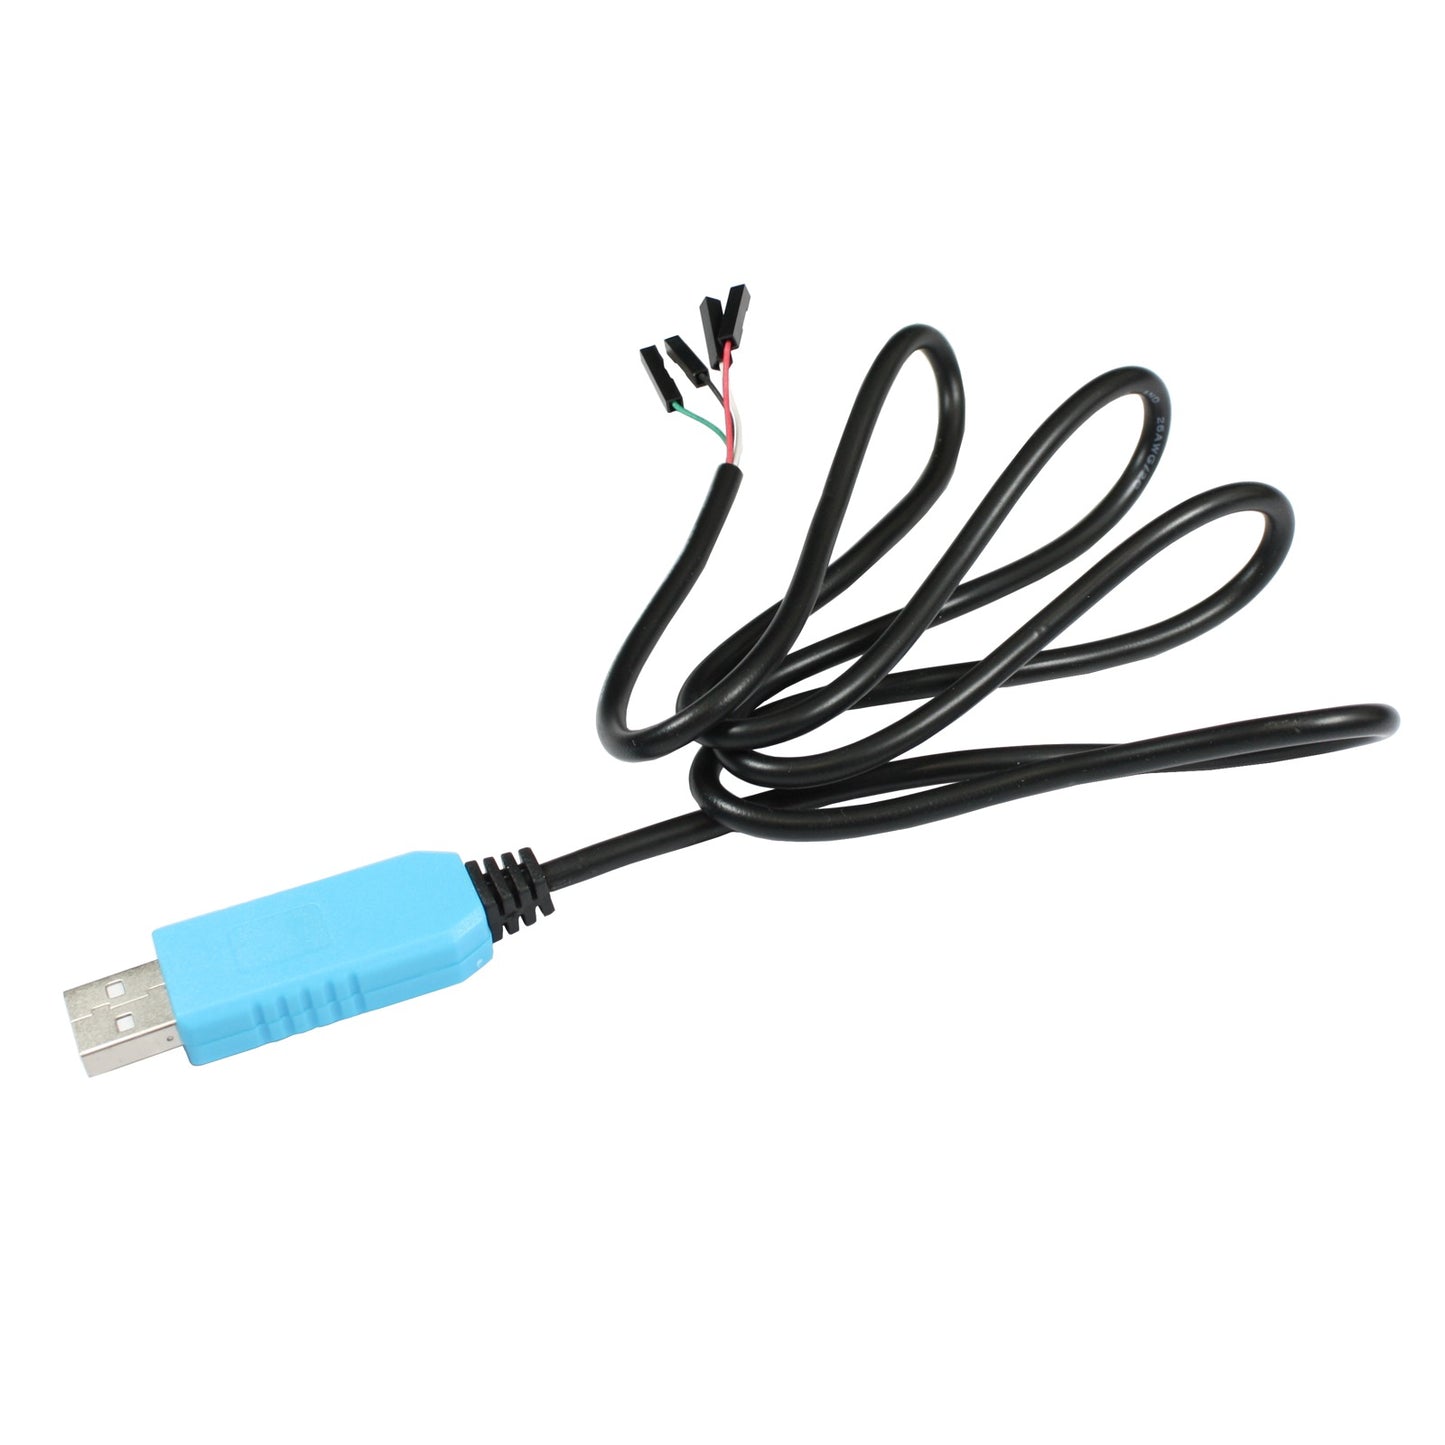 USB to TTL, UART-Converter-Cable, Serial Connector, PL2303TA compatible